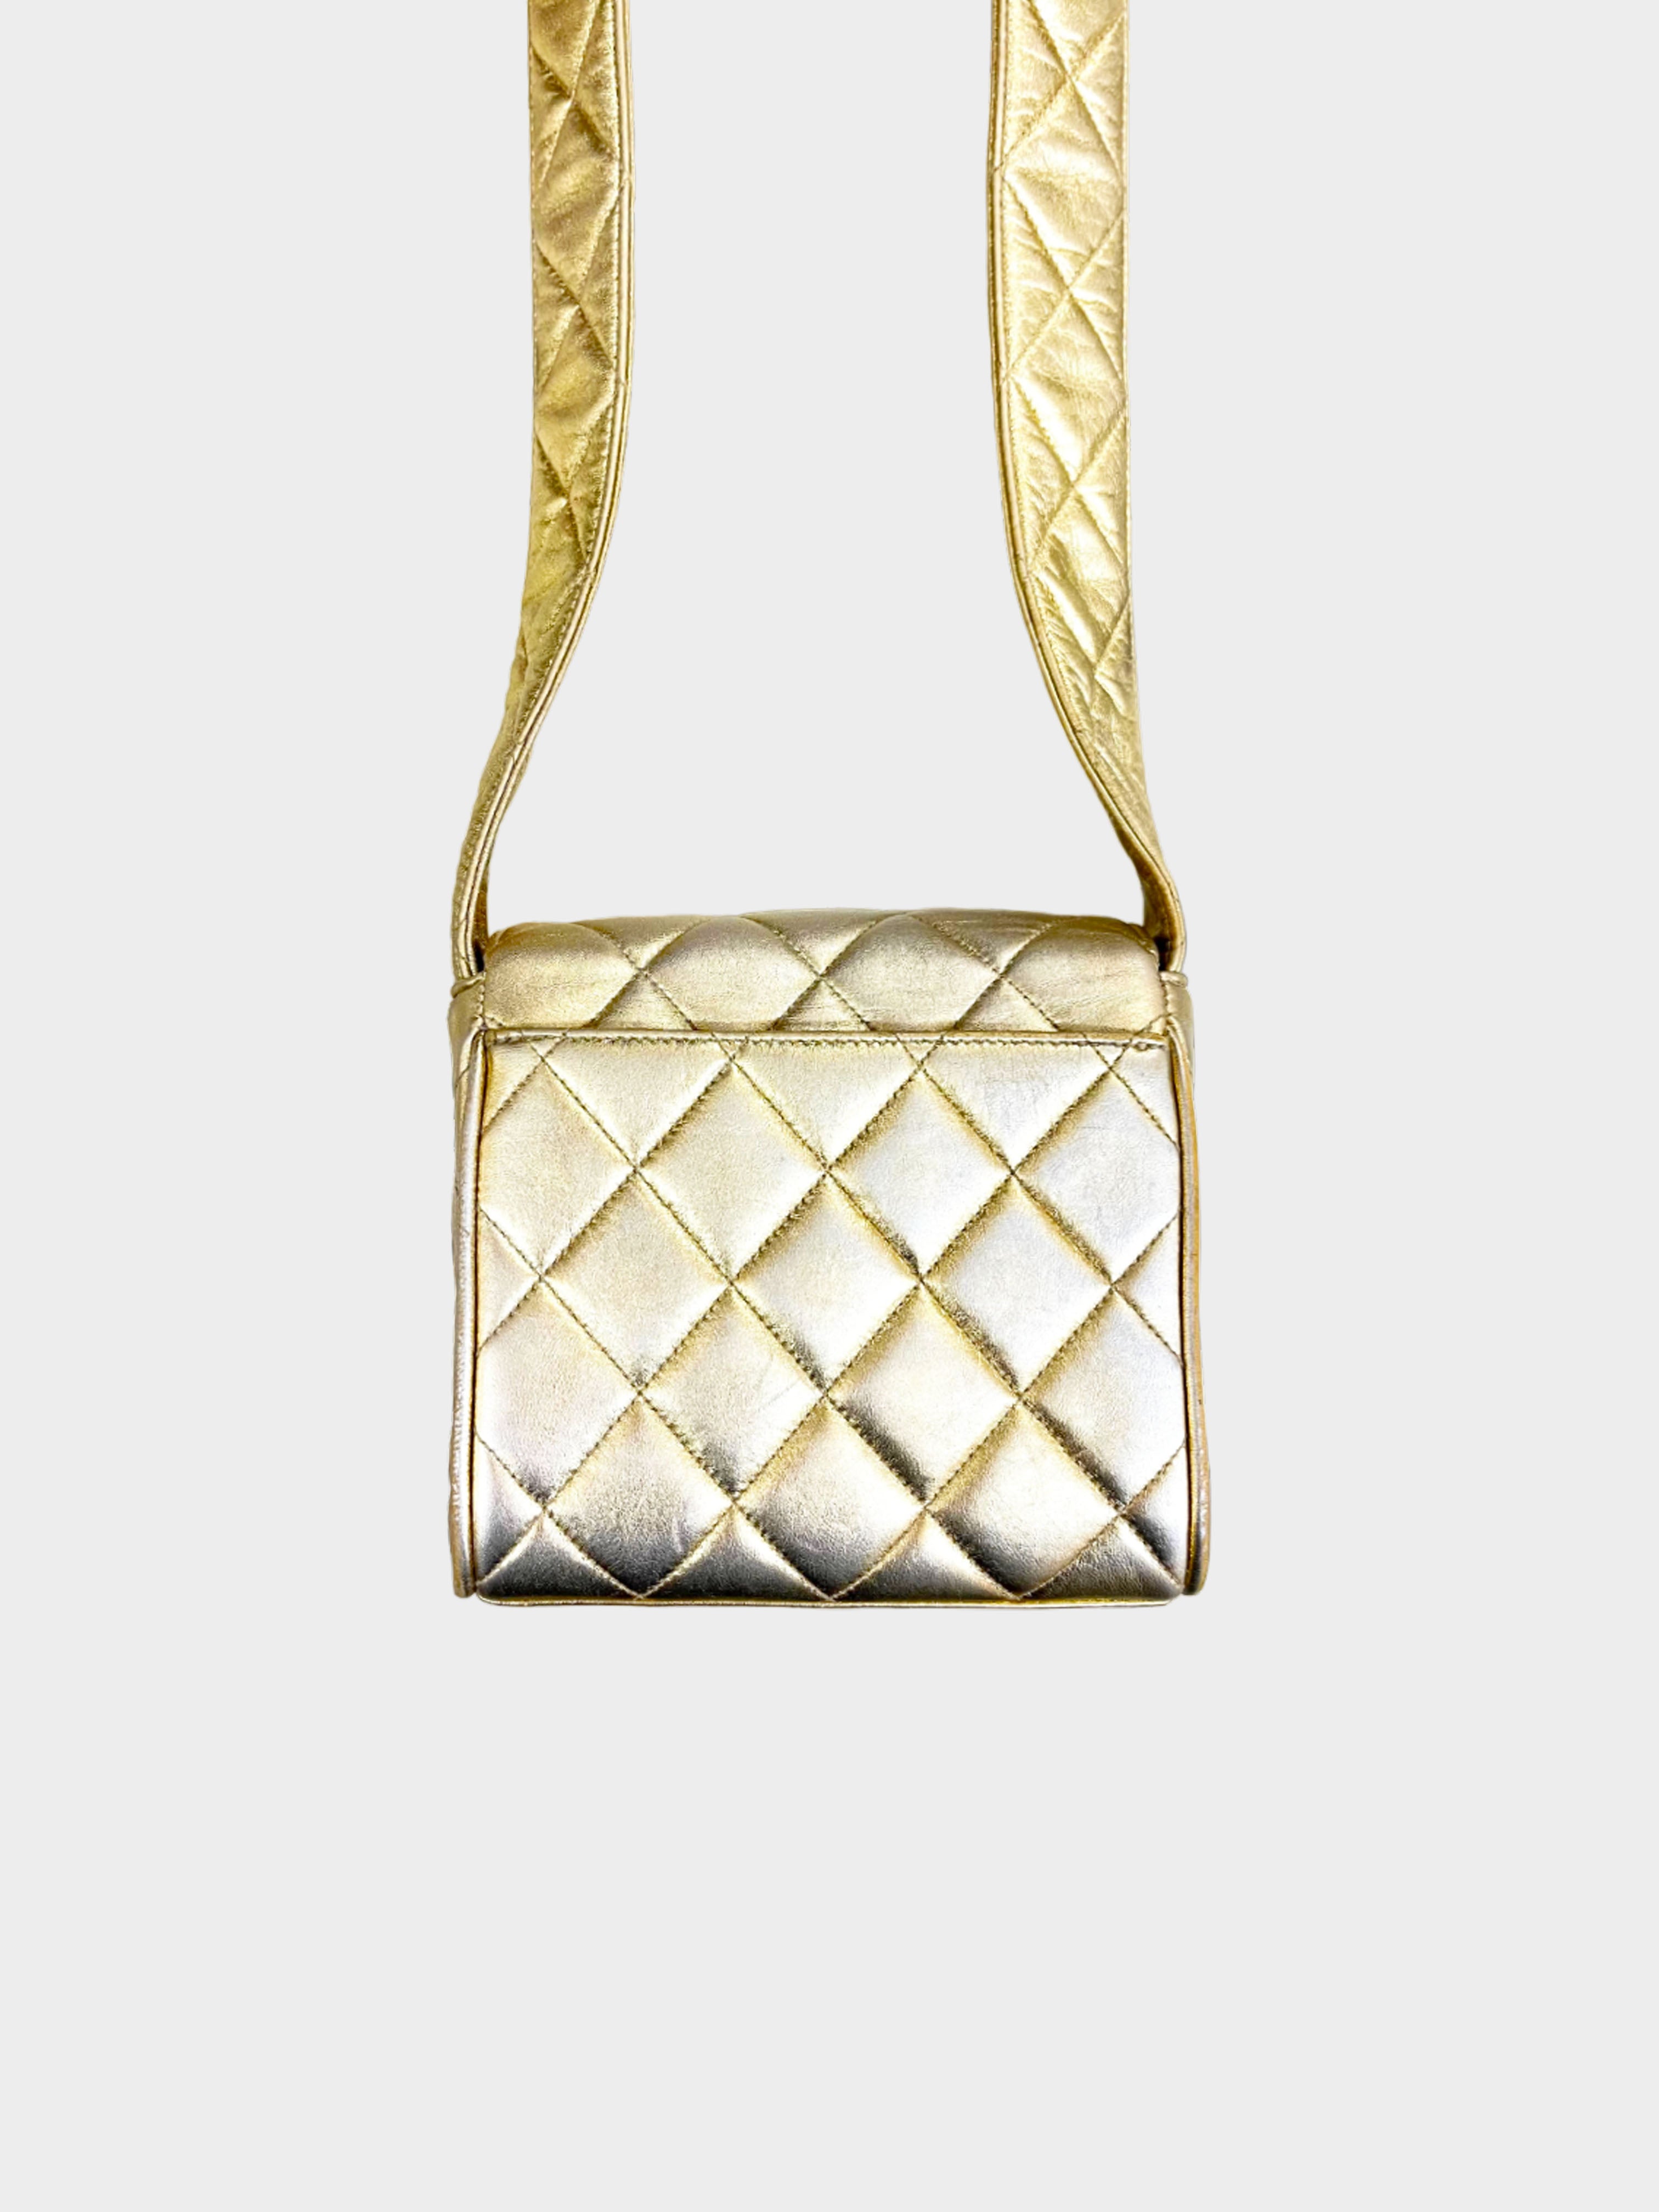 Chanel 1992 Gold Quilted Flap Crossbody Bag